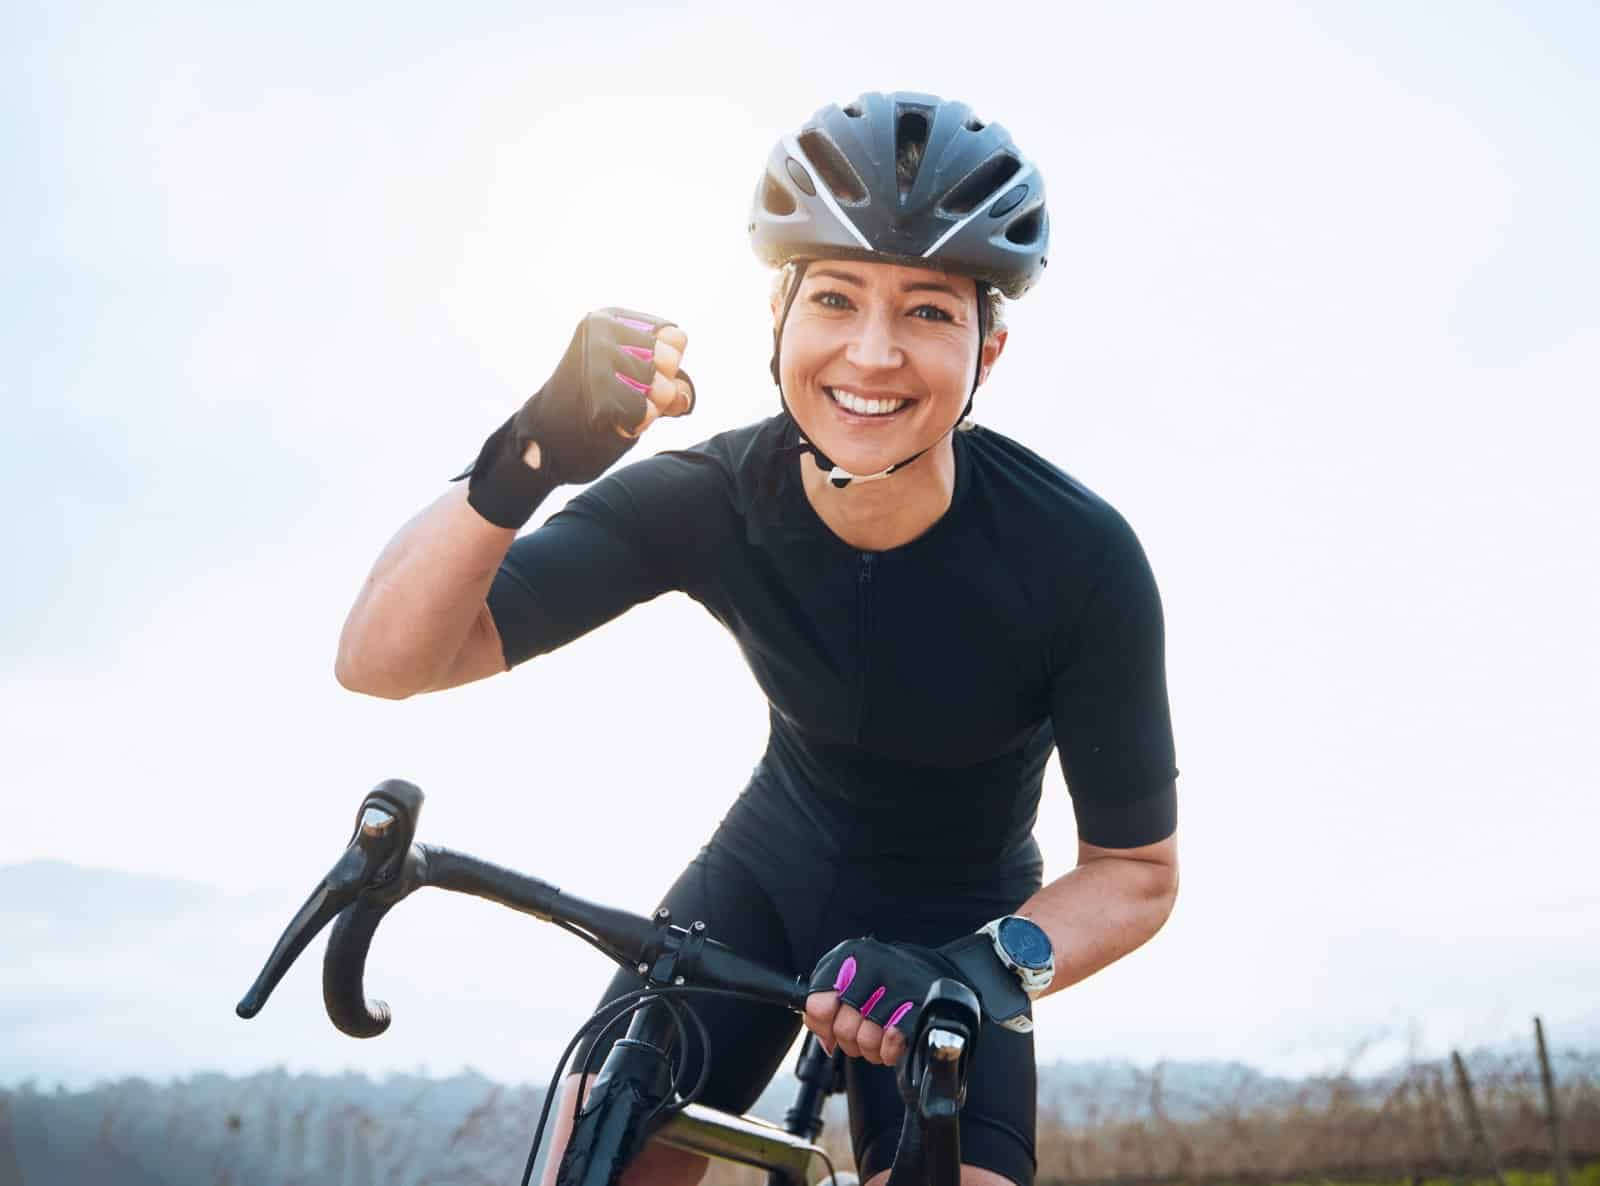 <p class="wp-caption-text">Image Credit: Shutterstock / PeopleImages.com – Yuri A</p>  <p><span>Your safety and well-being are paramount on a cycling tour. This encompasses not only adhering to road safety rules and wearing a helmet but also being prepared for any minor injuries or health issues that may arise. Equip yourself with a comprehensive first aid kit tailored to cycling-specific injuries, and educate yourself on basic first aid techniques and how to handle common ailments on the road.</span></p> <p><span>It’s also wise to carry a list of emergency contacts, including local emergency services for the areas you’ll be visiting, and ensure you have a means of communication in case of an emergency.</span></p> <p><span>Additionally, consider enrolling in a first aid course focused on outdoor activities to gain practical skills and confidence. Being well-prepared for safety and first aid will allow you to handle unexpected situations calmly and effectively, ensuring they don’t derail your adventure.</span></p> <p><b>Insider’s Tip: </b><span>Take a basic first aid course specifically designed for cyclists or outdoor adventurers before your trip.</span></p>